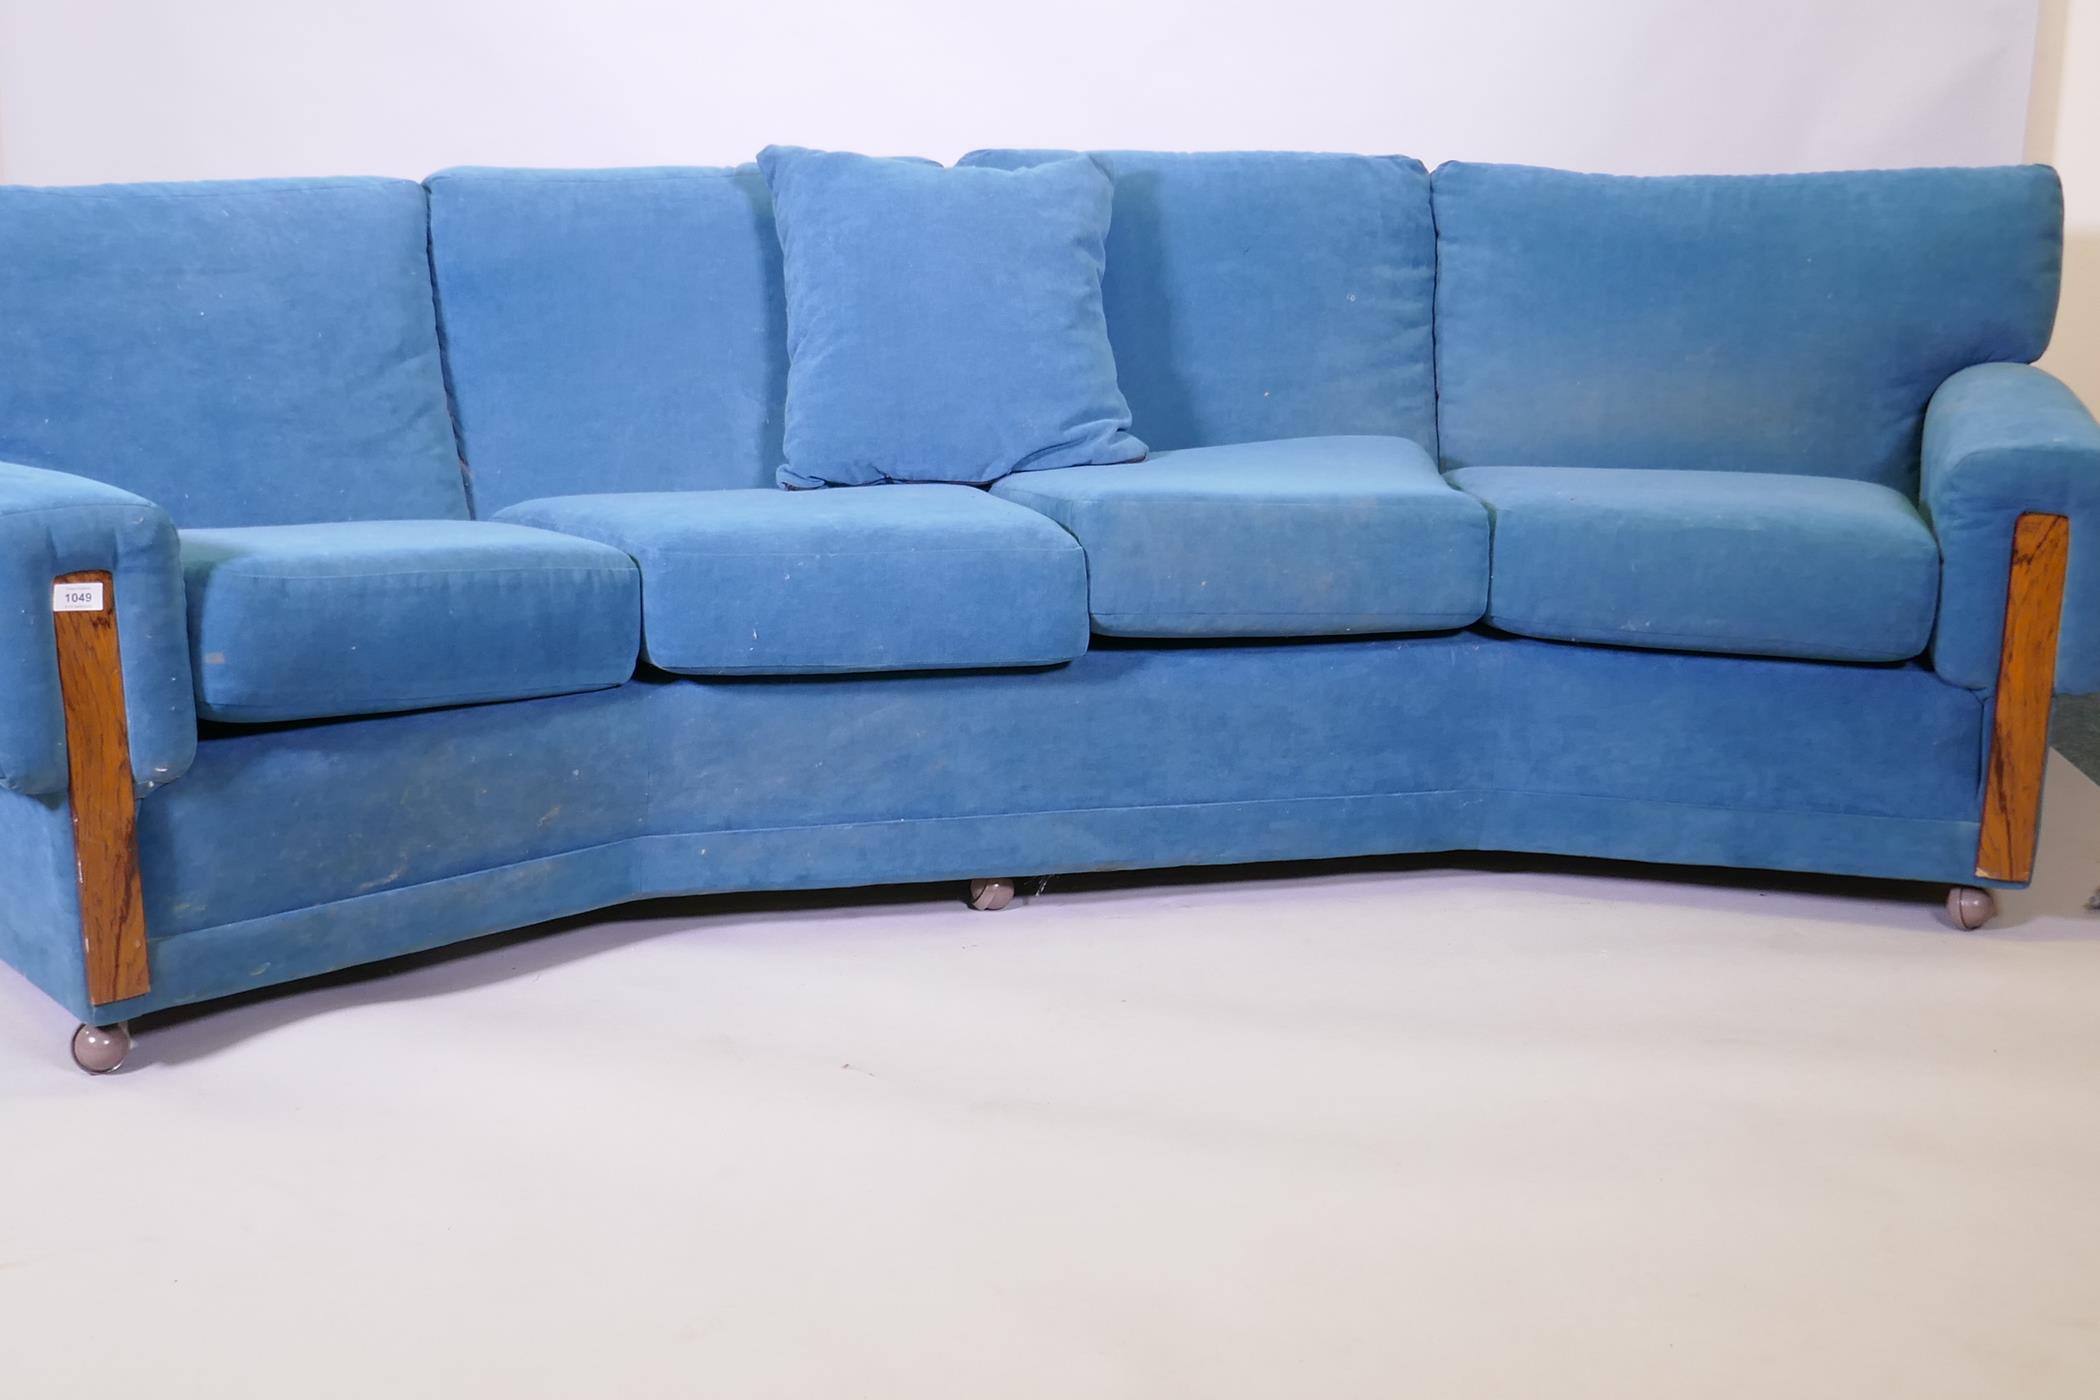 A G-Plan Re-form group four seater canted sofa, 260cm wide - Image 3 of 5